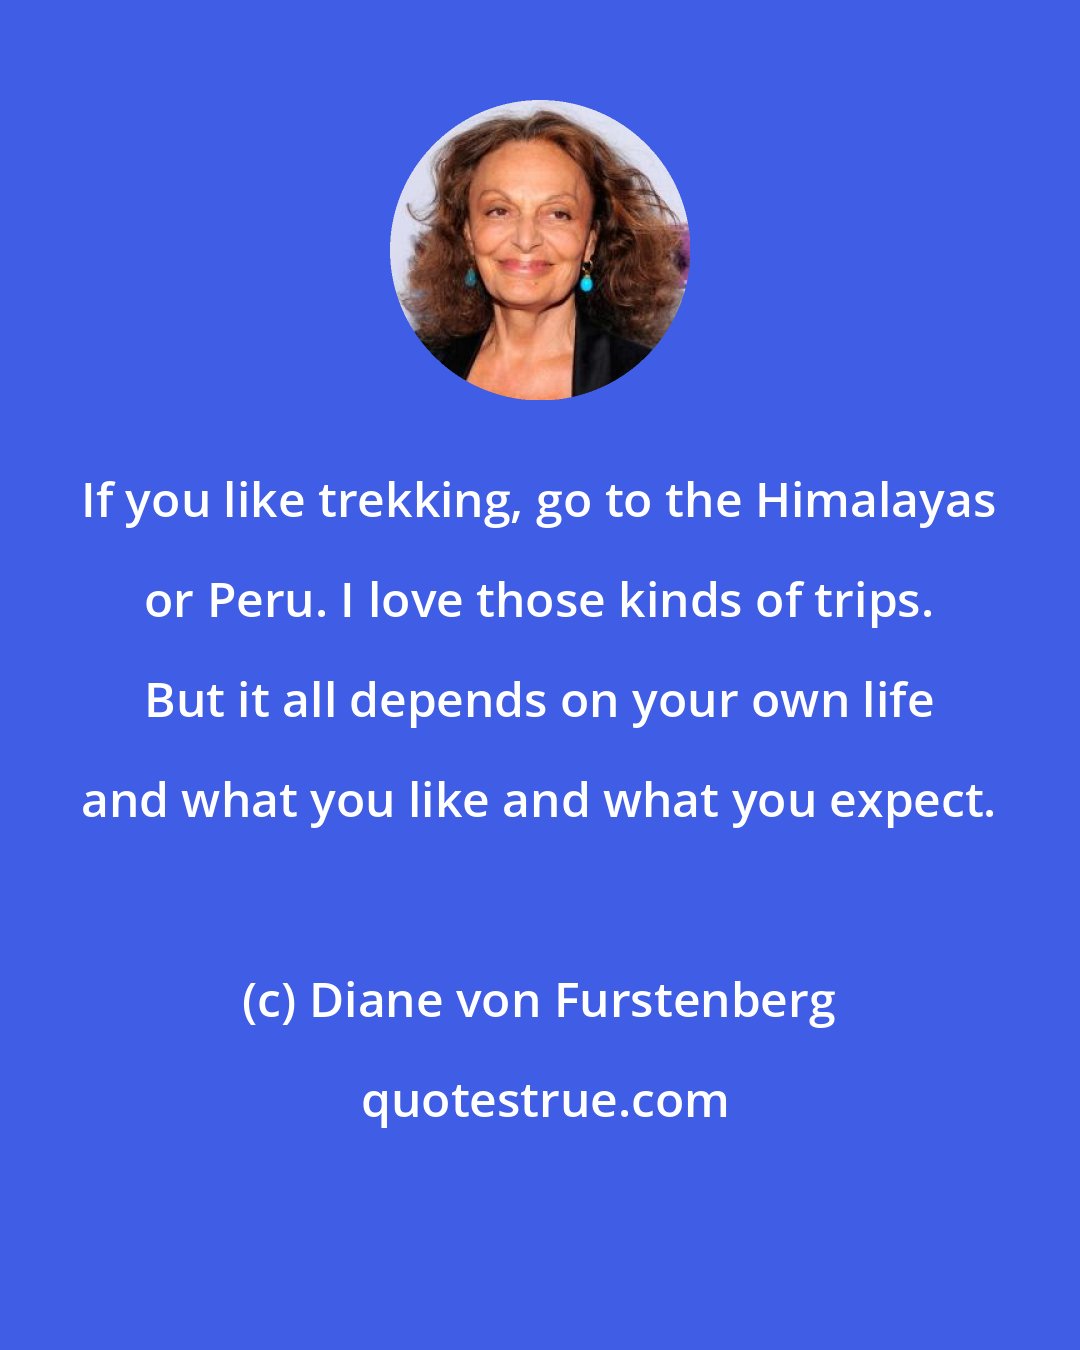 Diane von Furstenberg: If you like trekking, go to the Himalayas or Peru. I love those kinds of trips. But it all depends on your own life and what you like and what you expect.